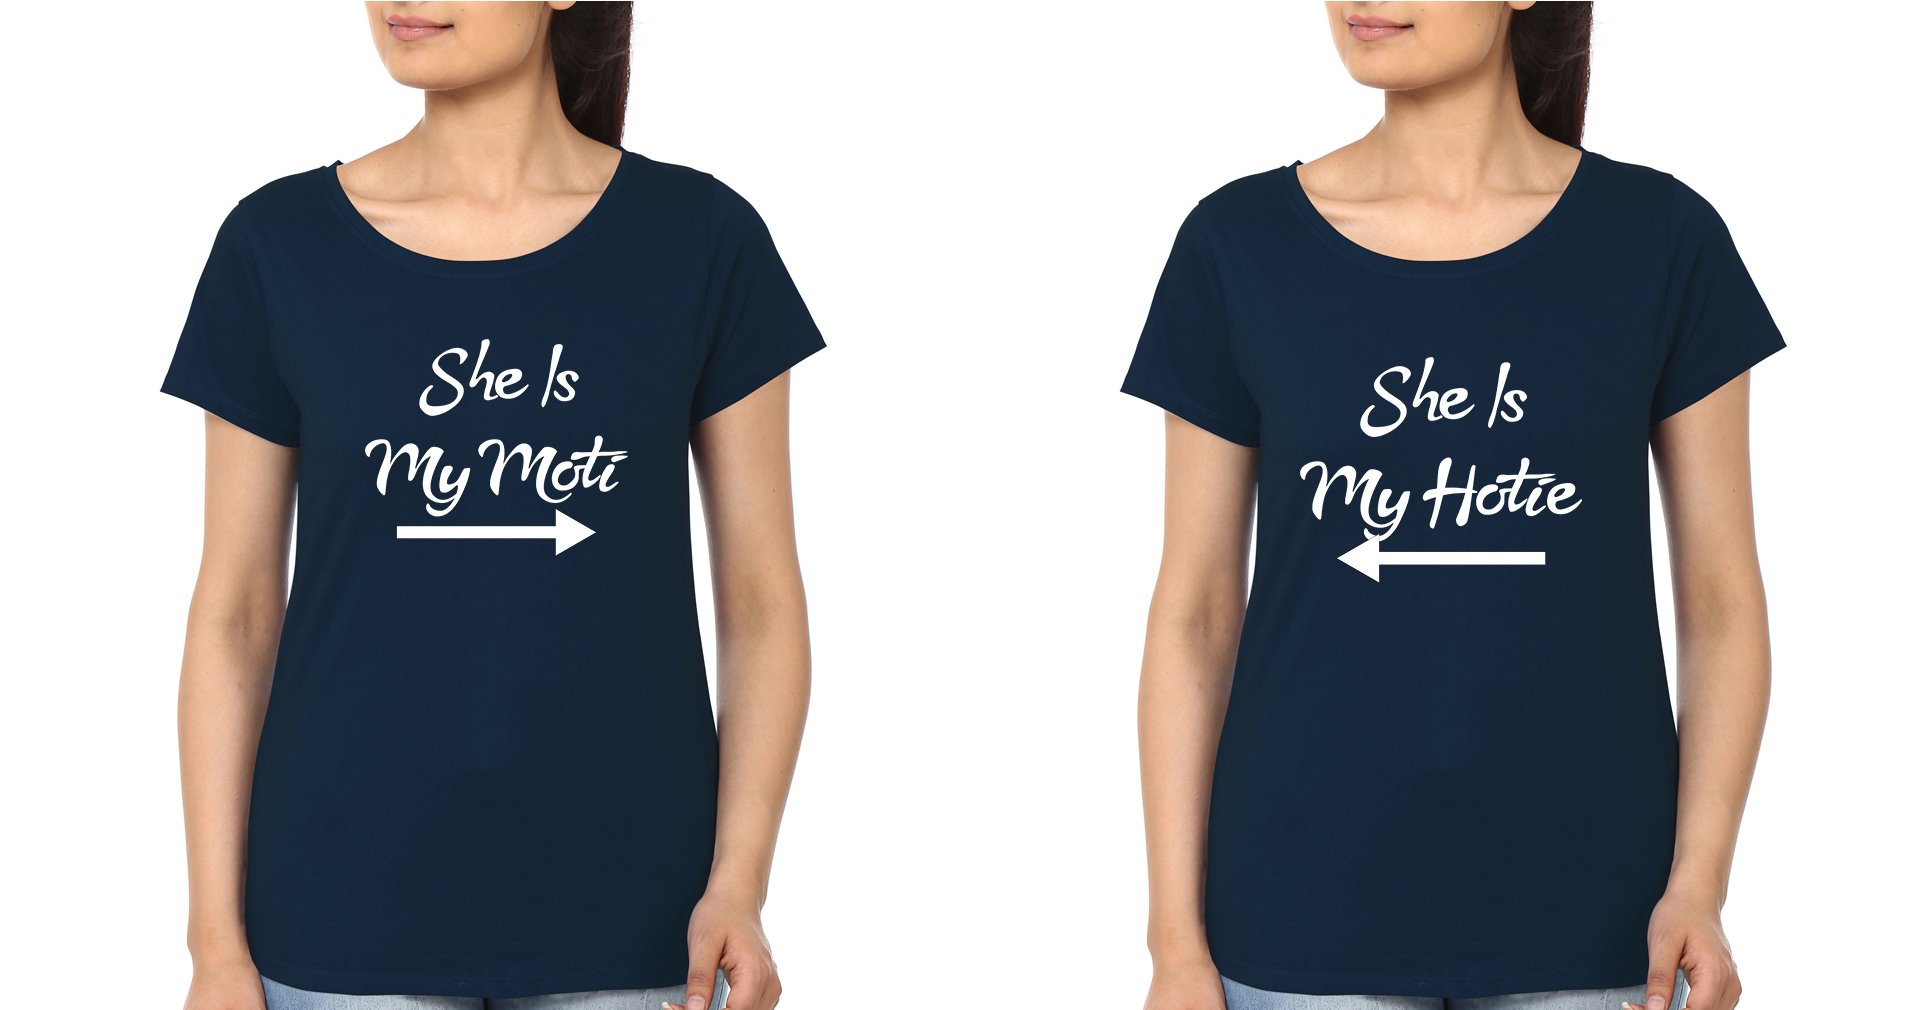 She Is Hotie She Is Moti  BFF Half Sleeves T-Shirts-FunkyTradition